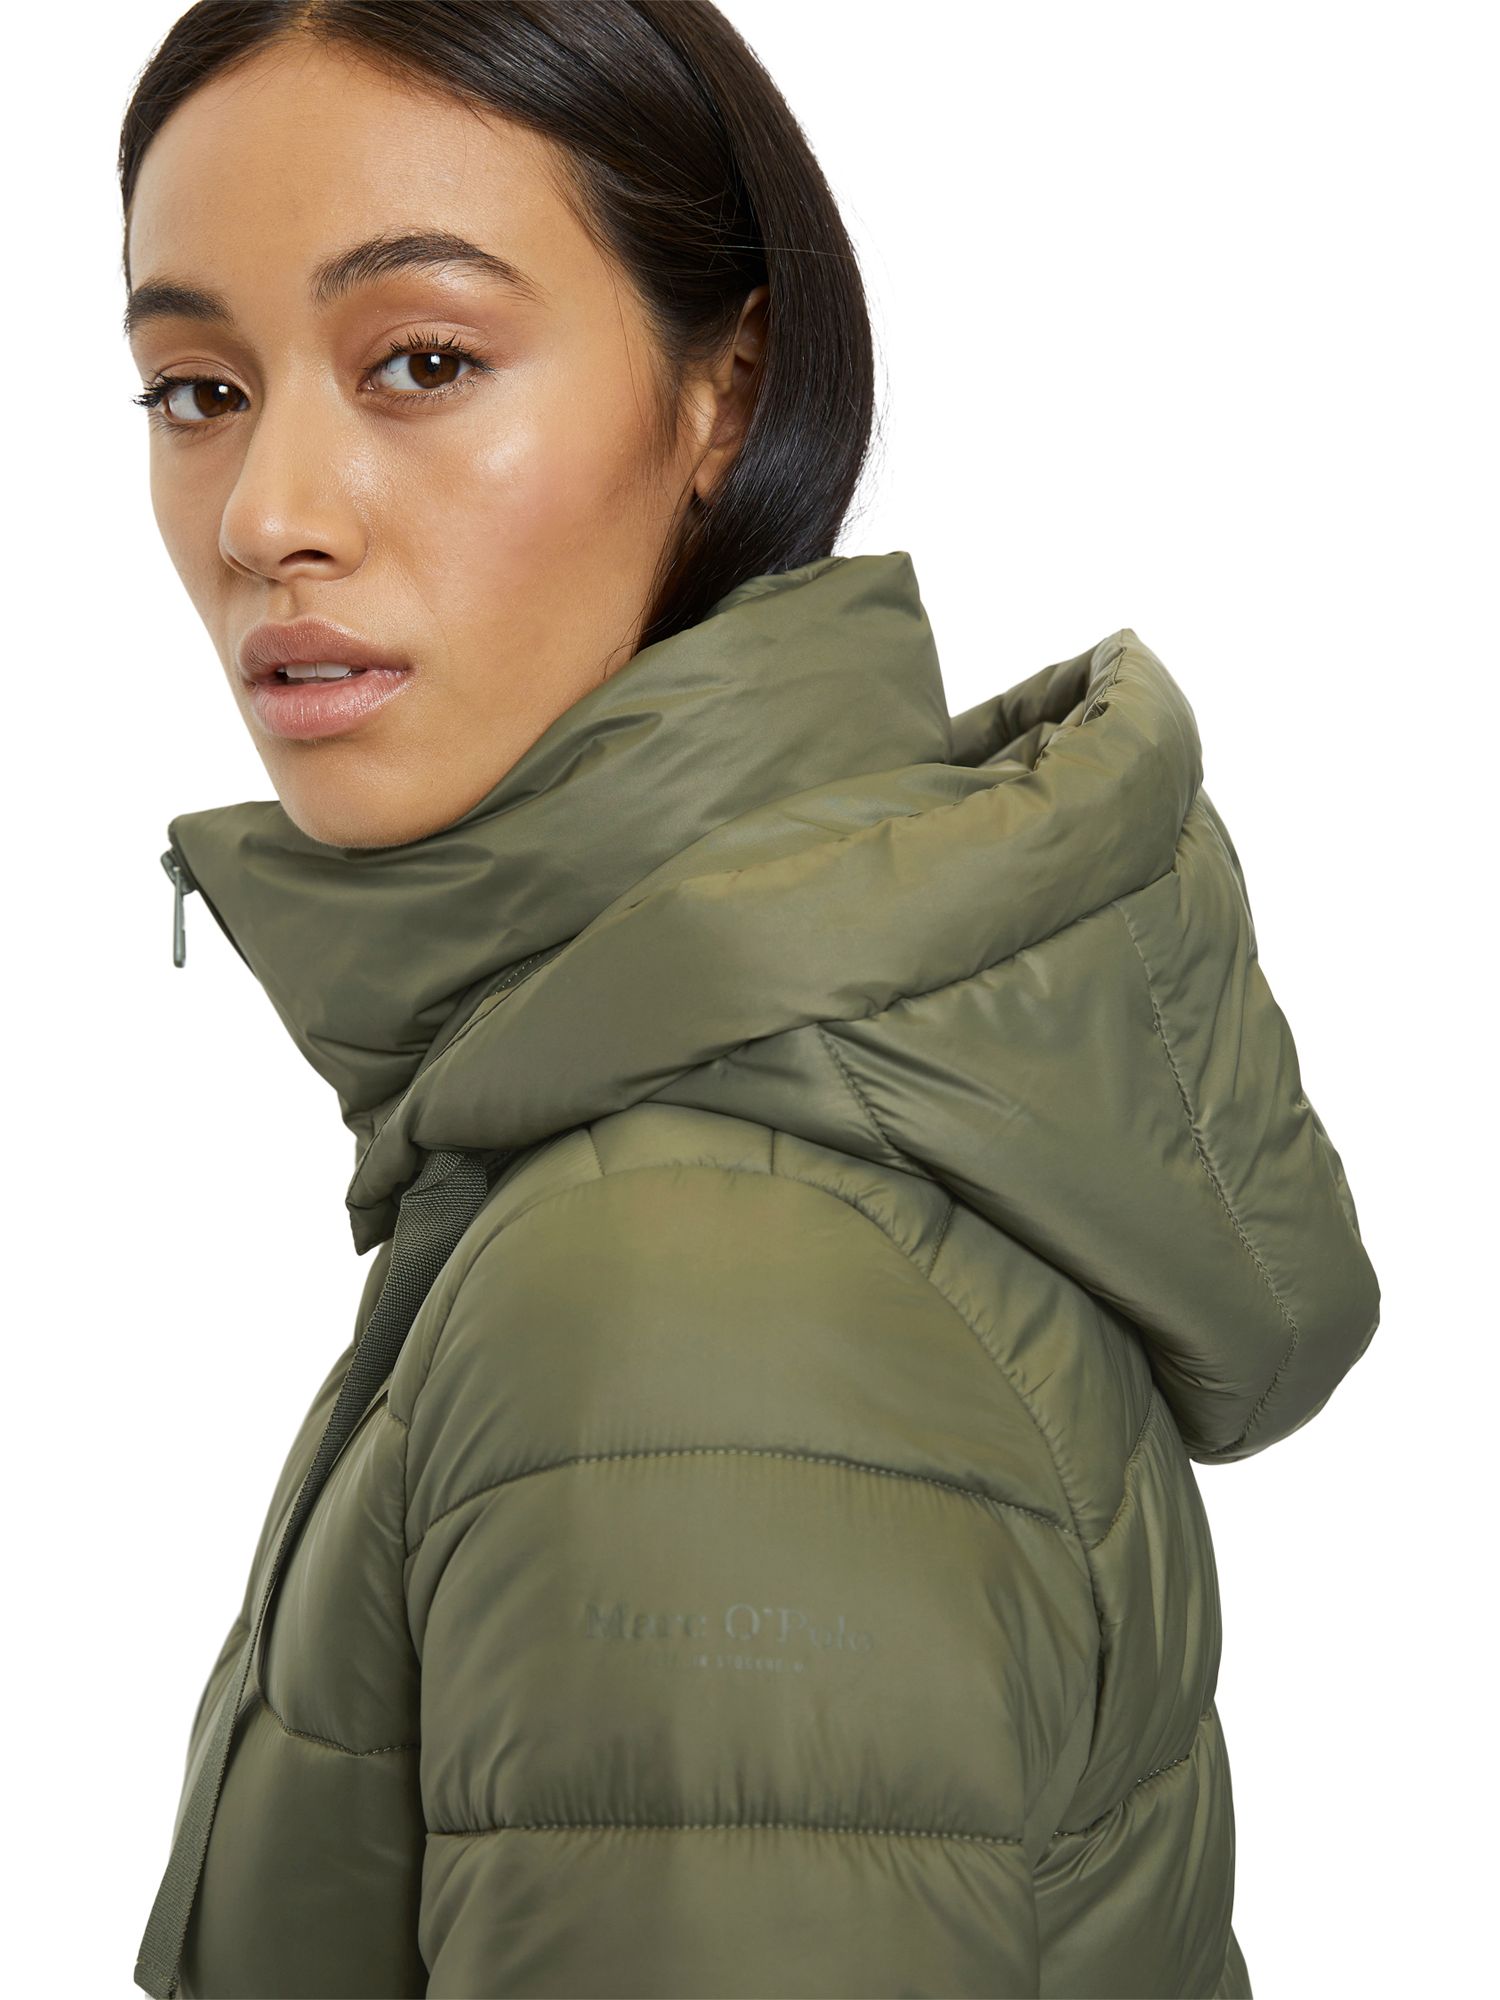 Marc O'Polo Lightweight Hooded Jacket, Olive at John Lewis & Partners